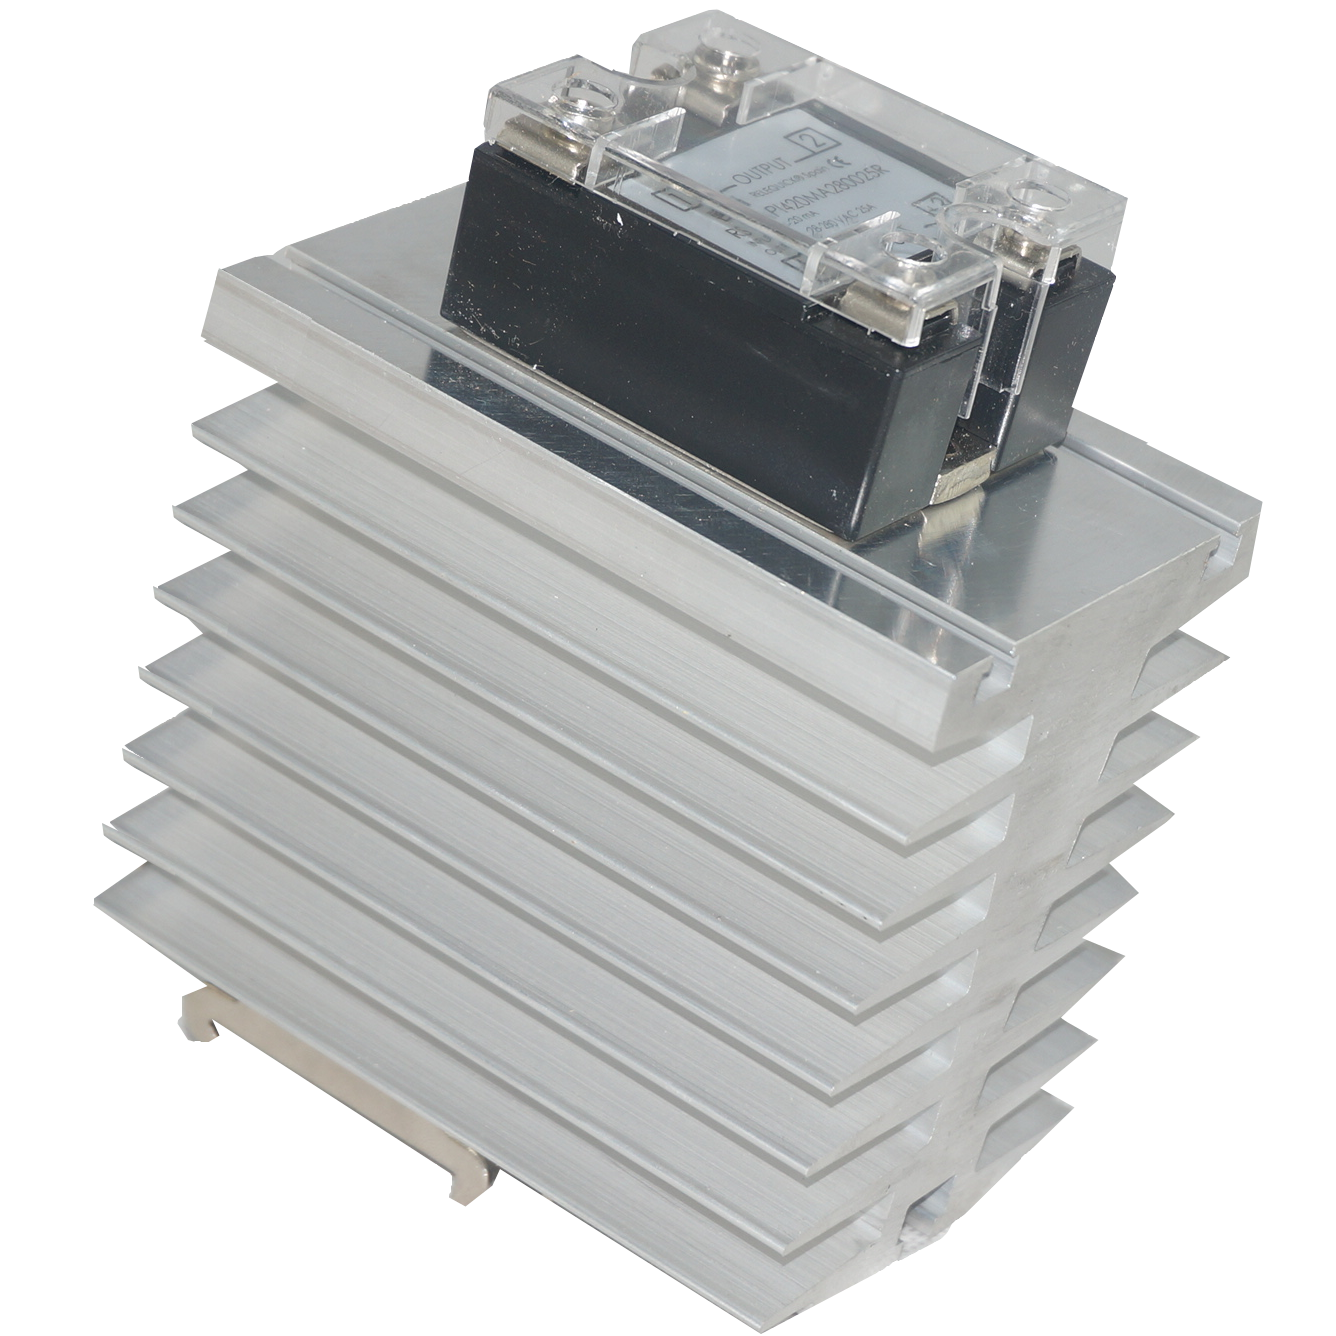 GFIN/150M-DR + RS1API420MA280080R, Din Rail Mount Single Phase Proportional Phase Controller with Heatsink, 4-20mA Input, 240V, 68 Amps @ 40 Deg C